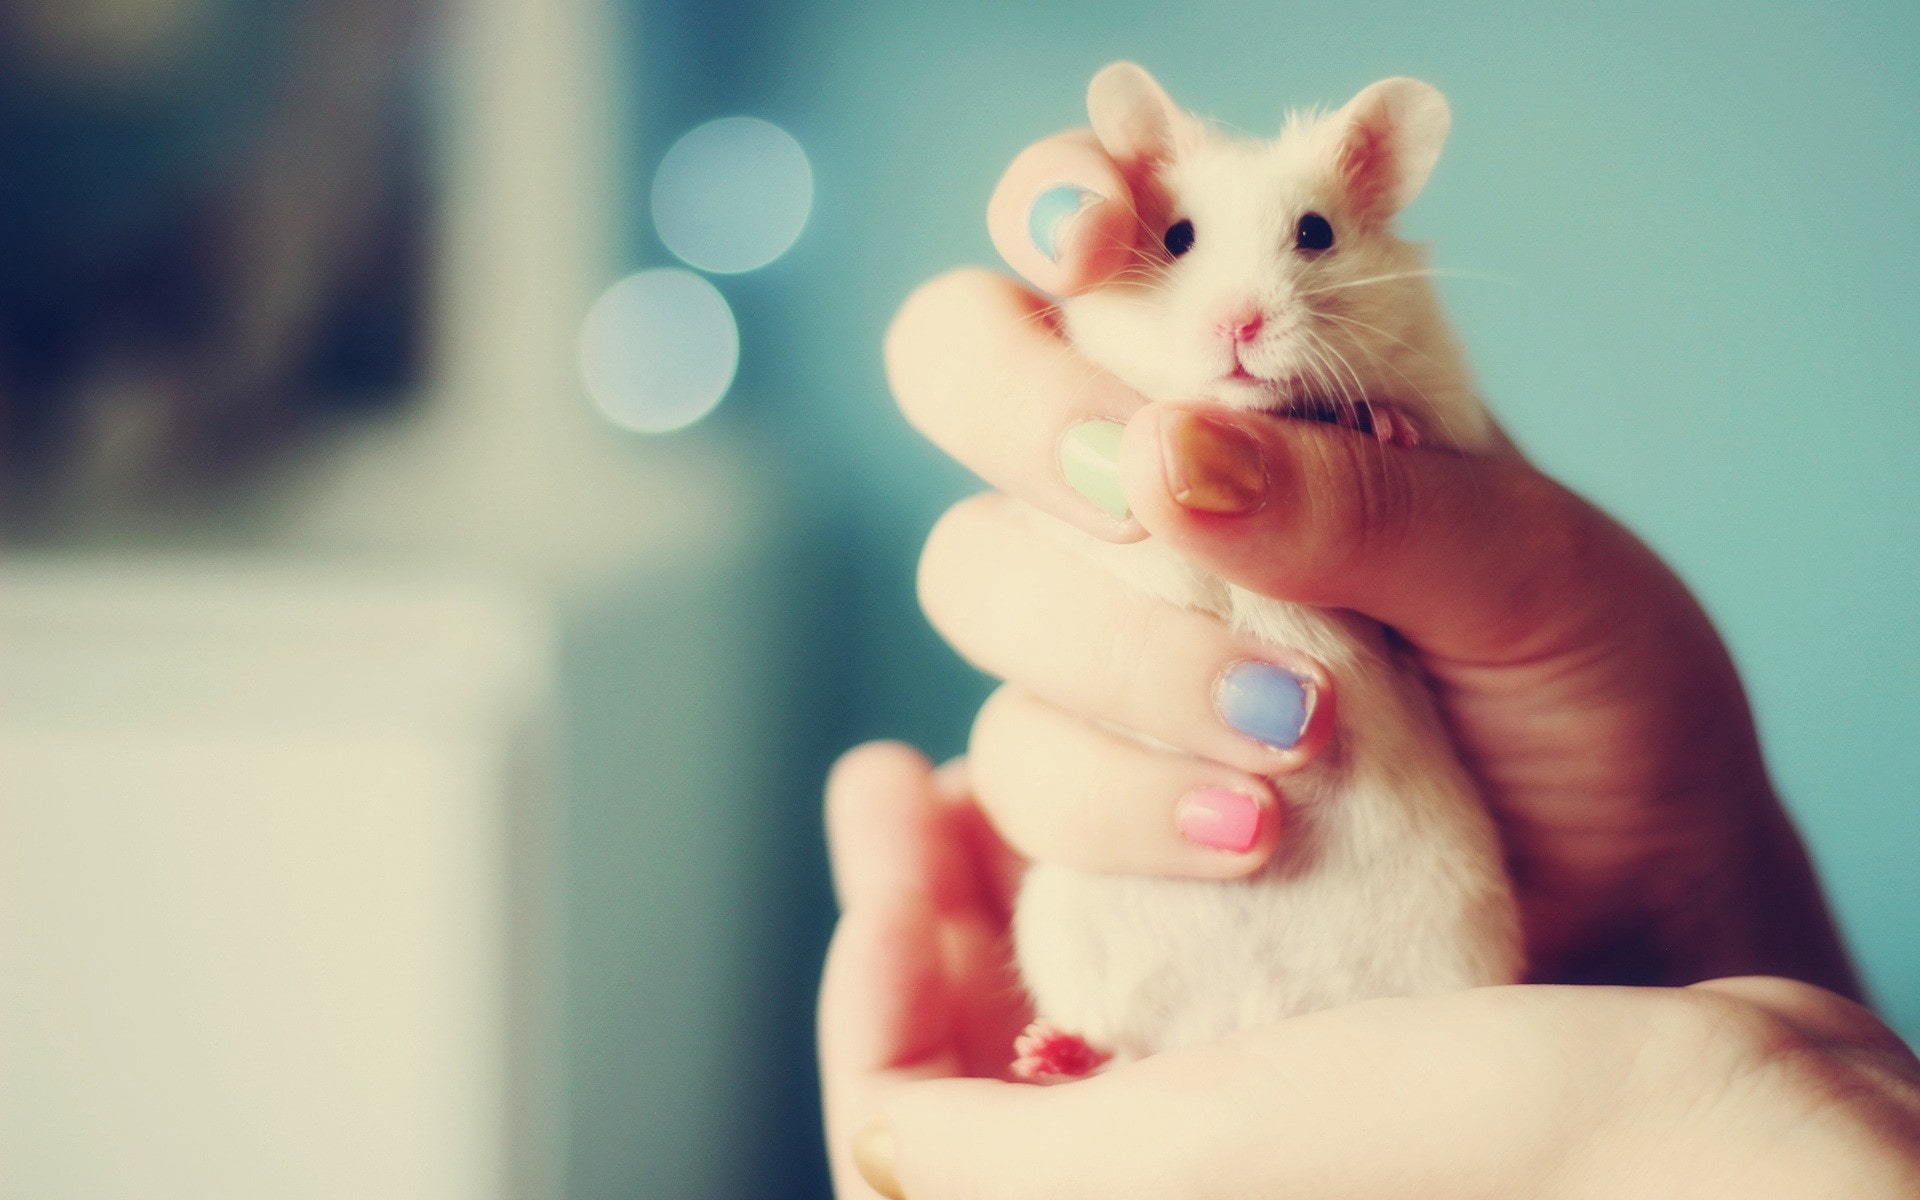 Hand with colorful fingernails handling a hamster.